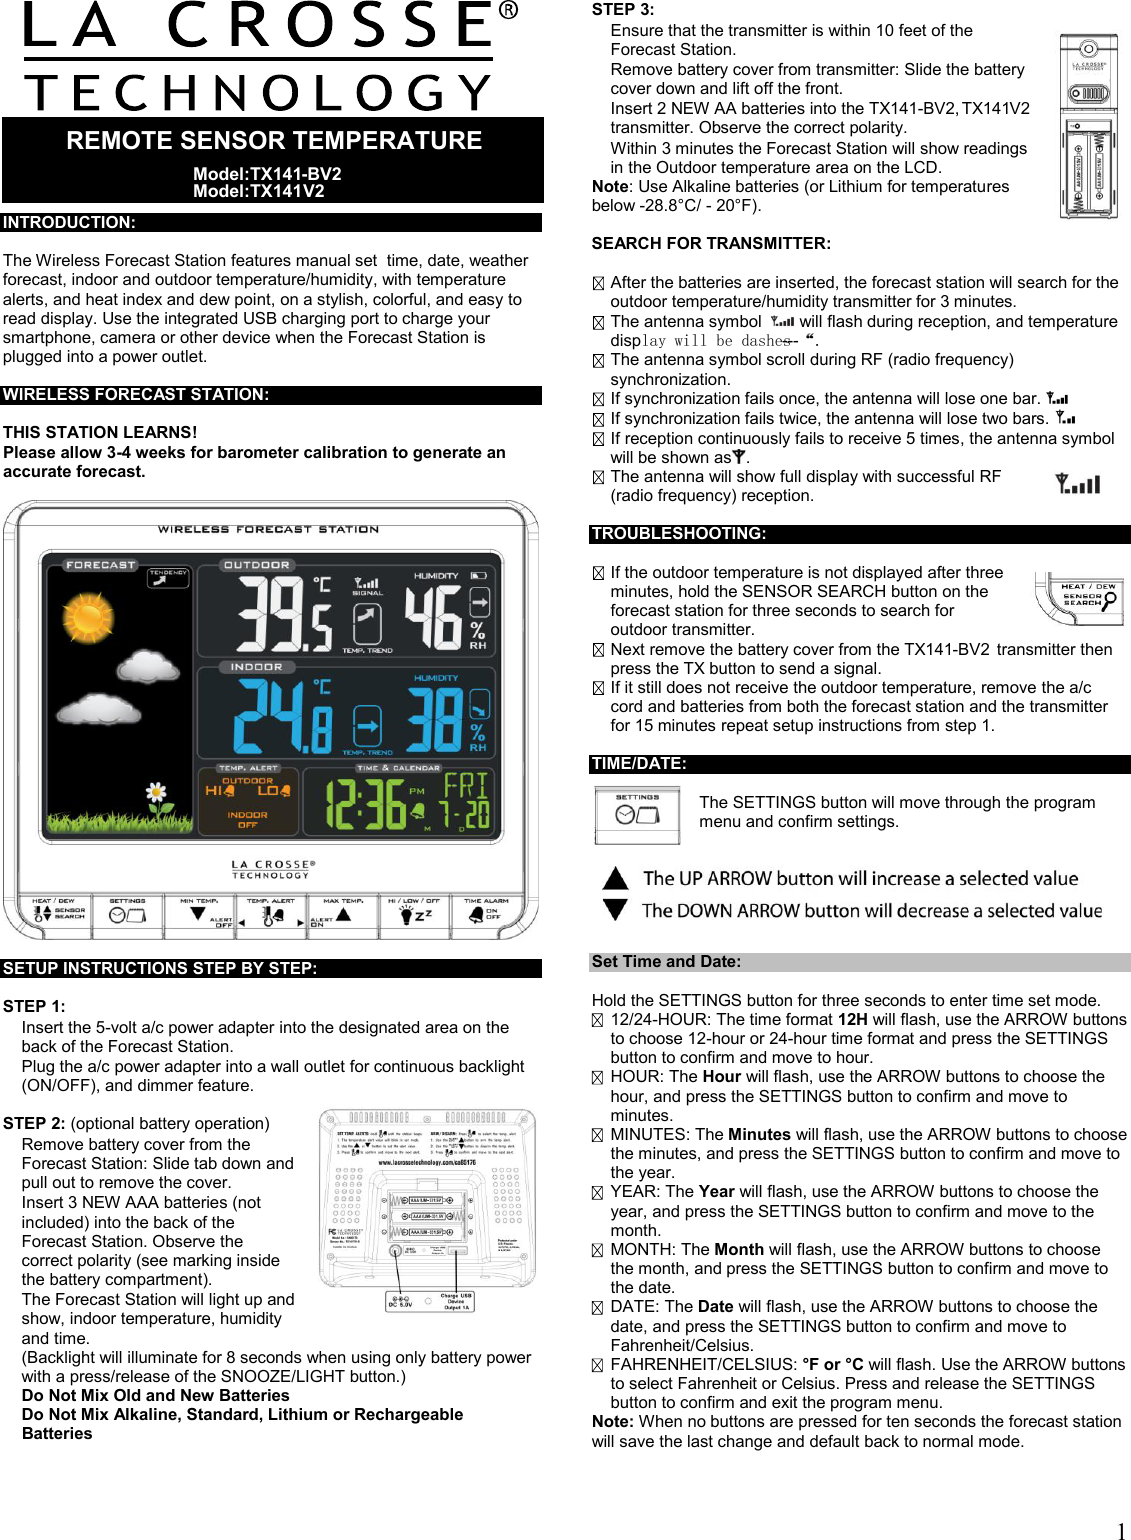  1         INTRODUCTION:  The Wireless Forecast Station features manual set  time, date, weather forecast, indoor and outdoor temperature/humidity, with temperature alerts, and heat index and dew point, on a stylish, colorful, and easy to read display. Use the integrated USB charging port to charge your smartphone, camera or other device when the Forecast Station is plugged into a power outlet.  WIRELESS FORECAST STATION:  THIS STATION LEARNS! Please allow 3-4 weeks for barometer calibration to generate an accurate forecast.    SETUP INSTRUCTIONS STEP BY STEP:   STEP 1:    Insert the 5-volt a/c power adapter into the designated area on the back of the Forecast Station.    Plug the a/c power adapter into a wall outlet for continuous backlight (ON/OFF), and dimmer feature.   STEP 2: (optional battery operation)   Remove battery cover from the Forecast Station: Slide tab down and pull out to remove the cover.    Insert 3 NEW AAA batteries (not included) into the back of the Forecast Station. Observe the correct polarity (see marking inside the battery compartment).   The Forecast Station will light up and show, indoor temperature, humidity and time.  (Backlight will illuminate for 8 seconds when using only battery power with a press/release of the SNOOZE/LIGHT button.)  Do Not Mix Old and New Batteries  Do Not Mix Alkaline, Standard, Lithium or Rechargeable Batteries   STEP 3:   Ensure that the transmitter is within 10 feet of the Forecast Station.   Remove battery cover from transmitter: Slide the battery cover down and lift off the front.   Insert 2 NEW AA batteries into the TX141-BV2, TX141V2 transmitter. Observe the correct polarity.   Within 3 minutes the Forecast Station will show readings in the Outdoor temperature area on the LCD. Note: Use Alkaline batteries (or Lithium for temperatures below -28.8°C/ - 20°F).  SEARCH FOR TRANSMITTER:   After the batteries are inserted, the forecast station will search for the outdoor temperature/humidity transmitter for 3 minutes.  The antenna symbol    will flash during reception, and temperature display will be dashes “---“.  The antenna symbol scroll during RF (radio frequency) synchronization.  If synchronization fails once, the antenna will lose one bar.    If synchronization fails twice, the antenna will lose two bars.    If reception continuously fails to receive 5 times, the antenna symbol will be shown as .   The antenna will show full display with successful RF (radio frequency) reception.   TROUBLESHOOTING:   If the outdoor temperature is not displayed after three minutes, hold the SENSOR SEARCH button on the forecast station for three seconds to search for outdoor transmitter.   Next remove the battery cover from the TX141-BV2  transmitter then press the TX button to send a signal.  If it still does not receive the outdoor temperature, remove the a/c cord and batteries from both the forecast station and the transmitter for 15 minutes repeat setup instructions from step 1.                                         TIME/DATE:   The SETTINGS button will move through the program menu and confirm settings.    Set Time and Date:  Hold the SETTINGS button for three seconds to enter time set mode.  12/24-HOUR: The time format 12H will flash, use the ARROW buttons to choose 12-hour or 24-hour time format and press the SETTINGS button to confirm and move to hour.  HOUR: The Hour will flash, use the ARROW buttons to choose the hour, and press the SETTINGS button to confirm and move to minutes.  MINUTES: The Minutes will flash, use the ARROW buttons to choose the minutes, and press the SETTINGS button to confirm and move to the year.  YEAR: The Year will flash, use the ARROW buttons to choose the year, and press the SETTINGS button to confirm and move to the month.  MONTH: The Month will flash, use the ARROW buttons to choose the month, and press the SETTINGS button to confirm and move to the date.  DATE: The Date will flash, use the ARROW buttons to choose the date, and press the SETTINGS button to confirm and move to Fahrenheit/Celsius.  FAHRENHEIT/CELSIUS: °F or °C will flash. Use the ARROW buttons to select Fahrenheit or Celsius. Press and release the SETTINGS button to confirm and exit the program menu. Note: When no buttons are pressed for ten seconds the forecast station will save the last change and default back to normal mode.   REMOTE SENSOR TEMPERATURE   Model:TX141-BV2Model:TX141V2  